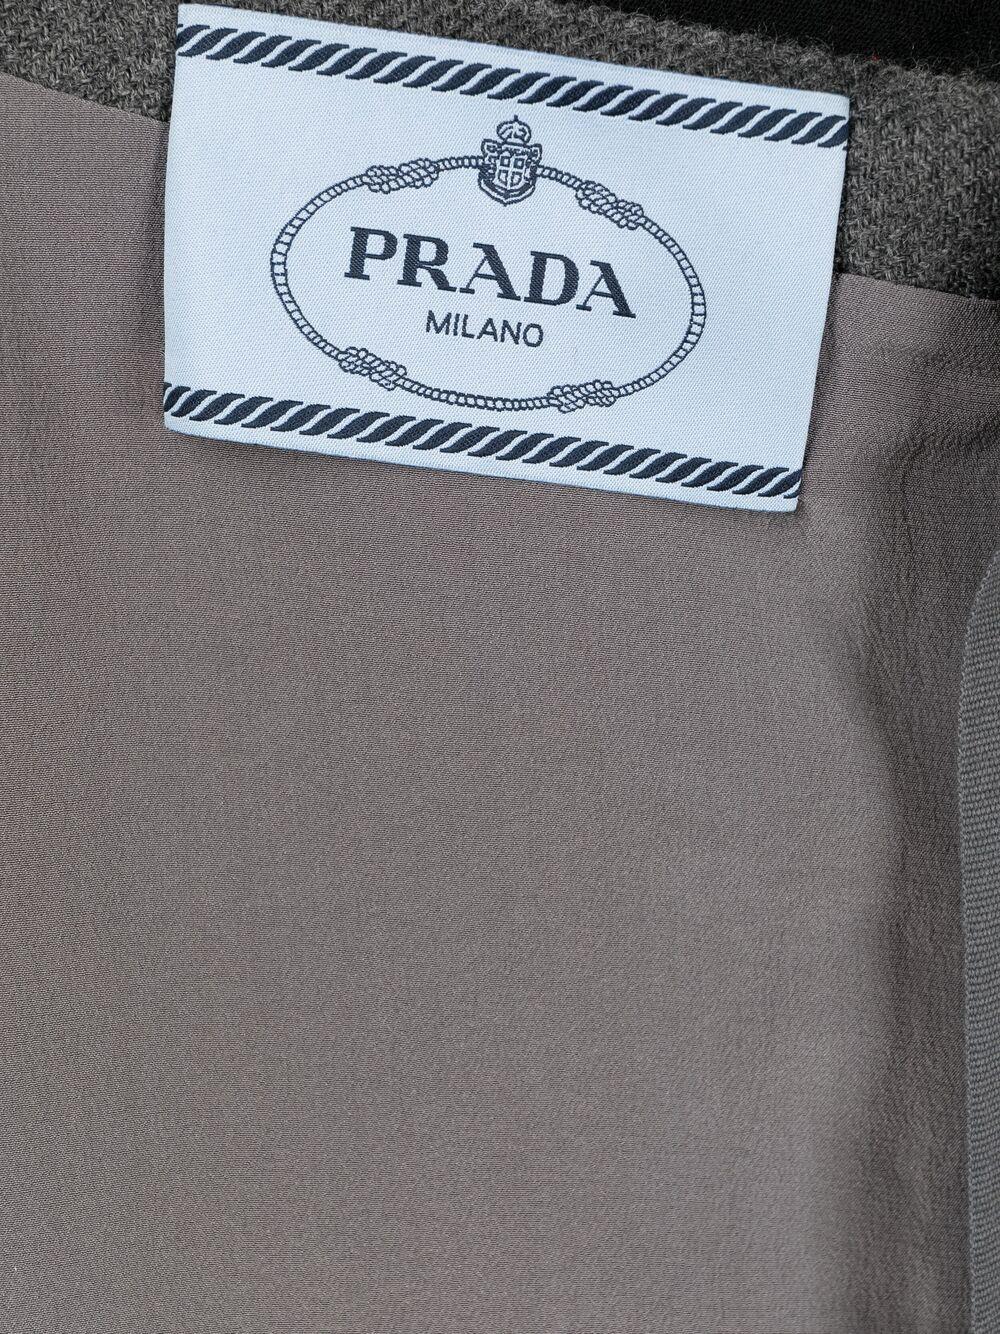 Prada grey wool dress featuring a black wool collar, a mid-length, ¾ sleeves length, a silk lining, a back-zip opening.
98% virgin wool, 2% polyester.
In excellent vintage condition. 
Made in Italy
Estimated size 38fr/US6 /UK10
We guarantee you will